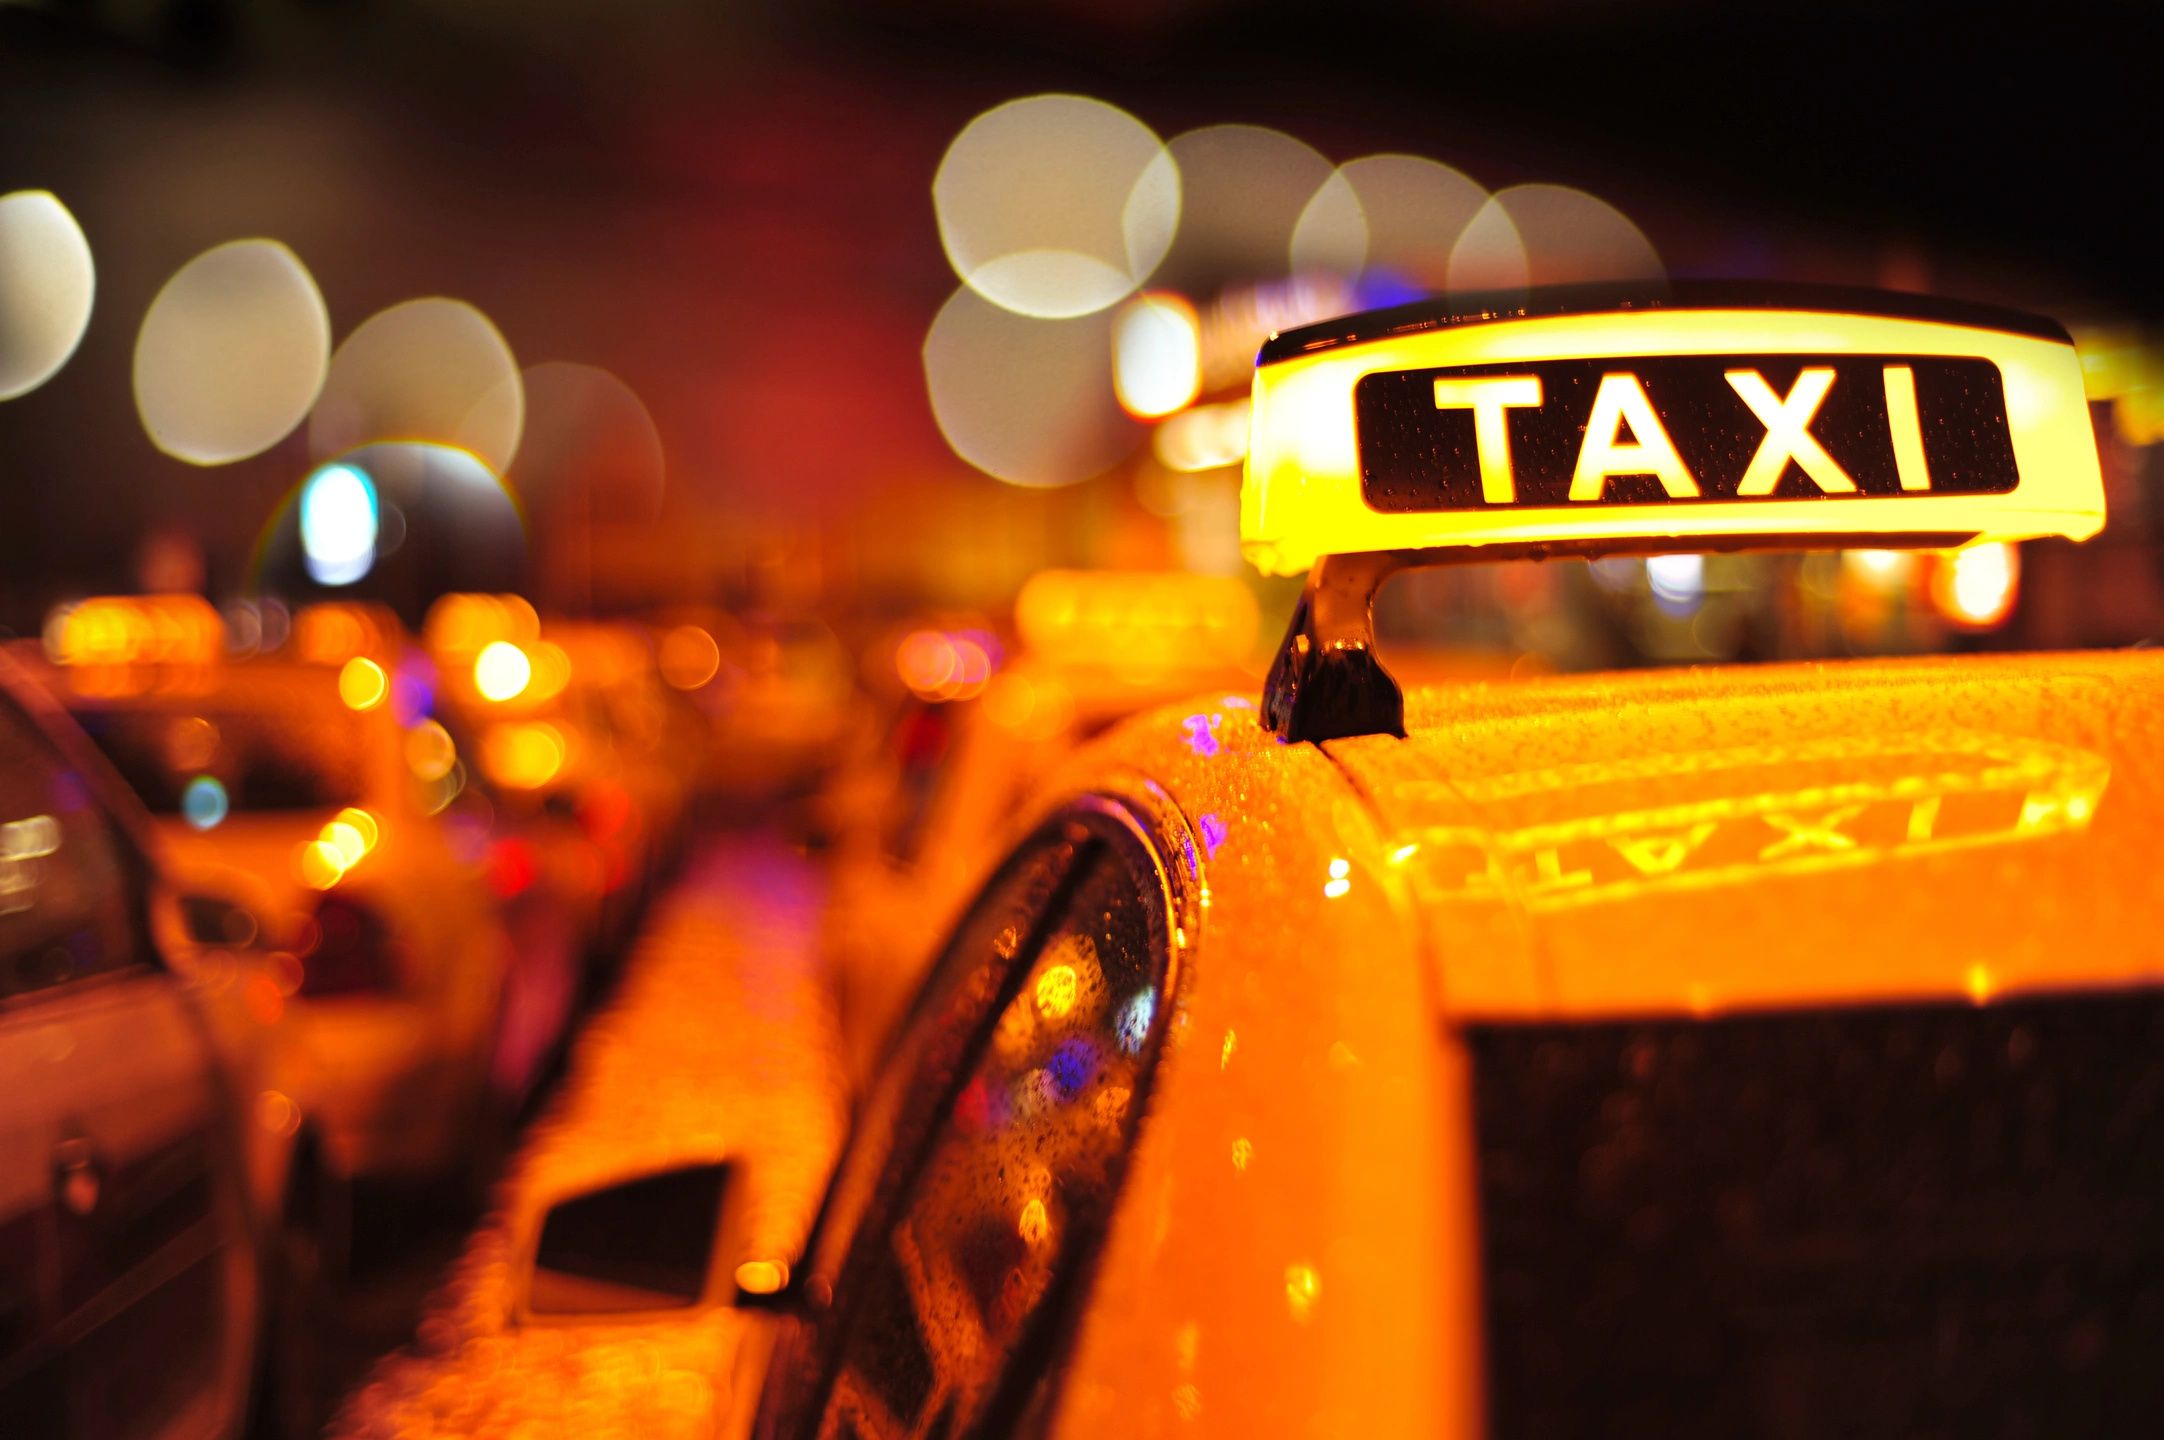 Taxi at night similar to one taken by DC widow Marjorie in story